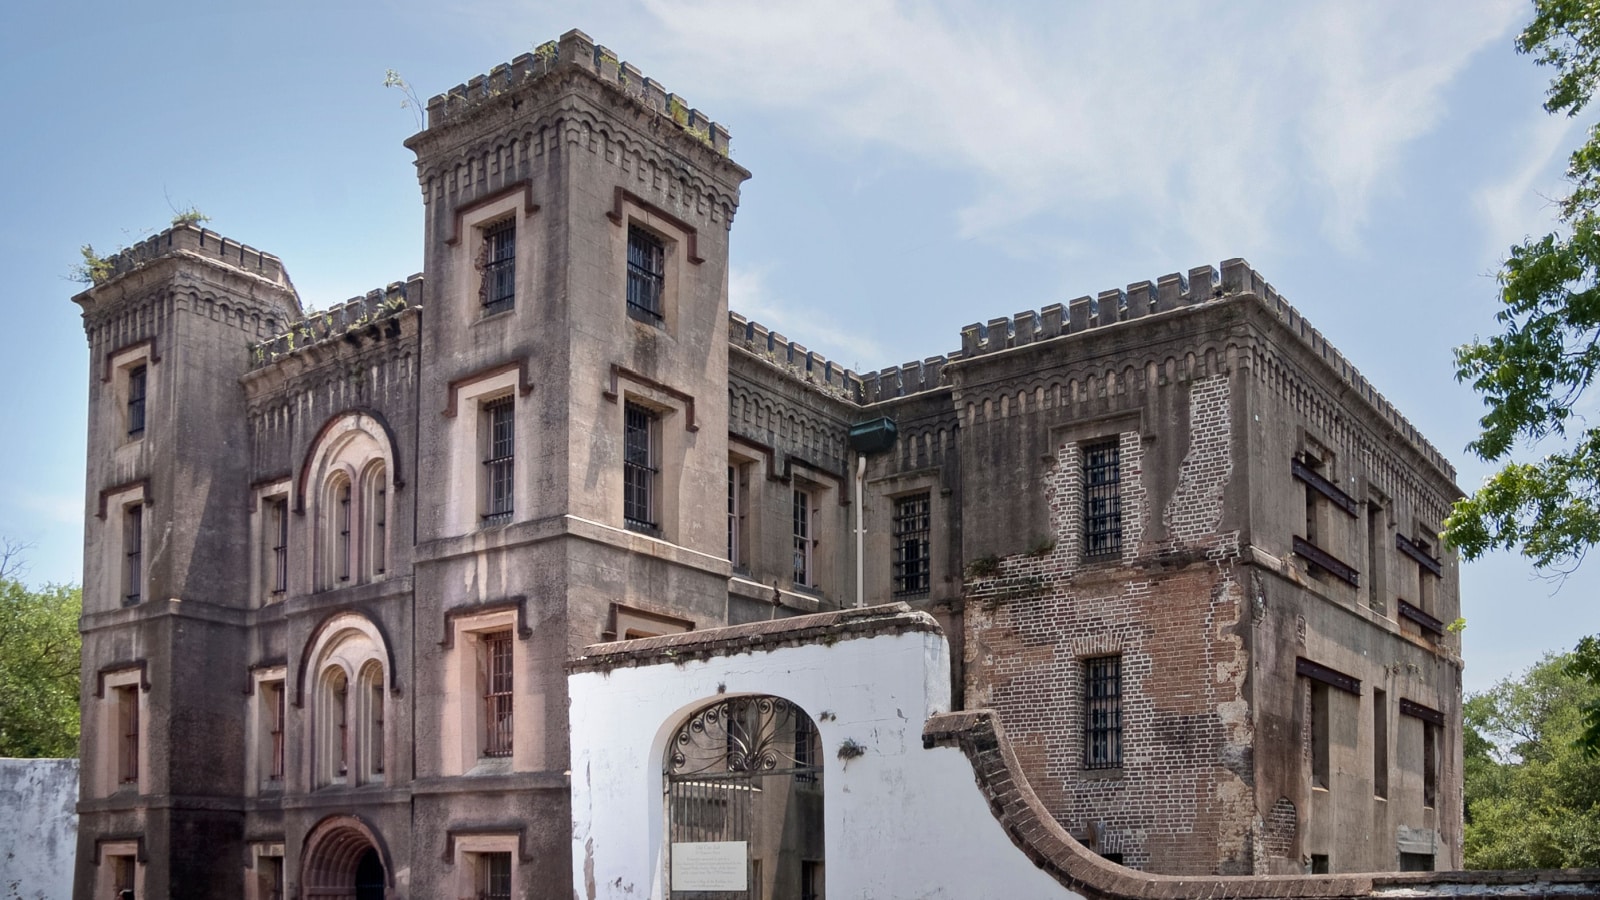 Front view of the Old City Jail, Charleston, South Carolina as taken on 17th May 2012.